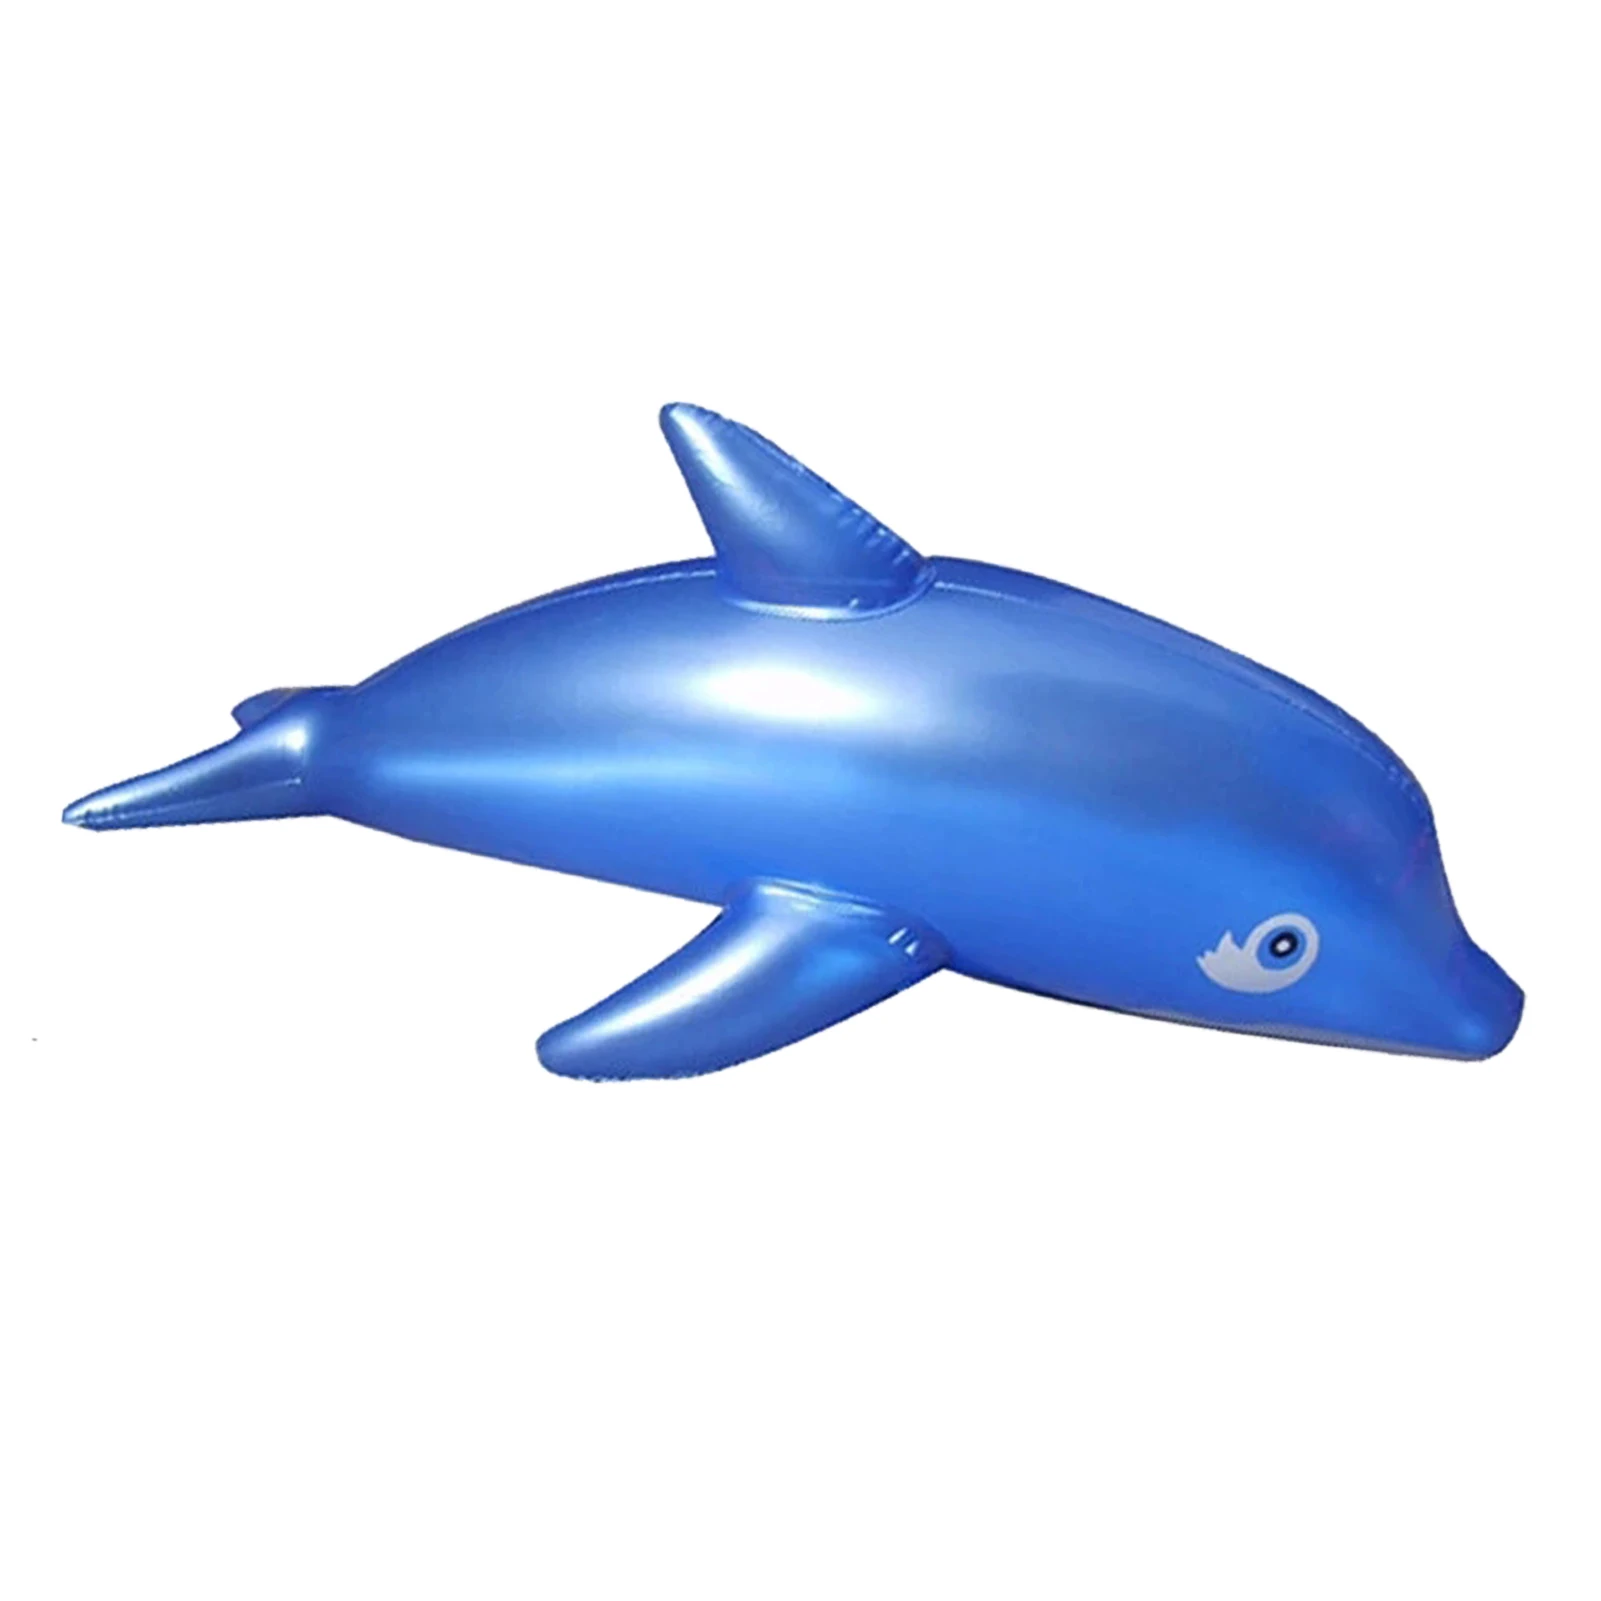 

Dolphin Inflatable Toy Dolphin Inflatable Pool Toy Birthday Party Decoration Best For Party Pool Supplies Favors Gifts For Kids